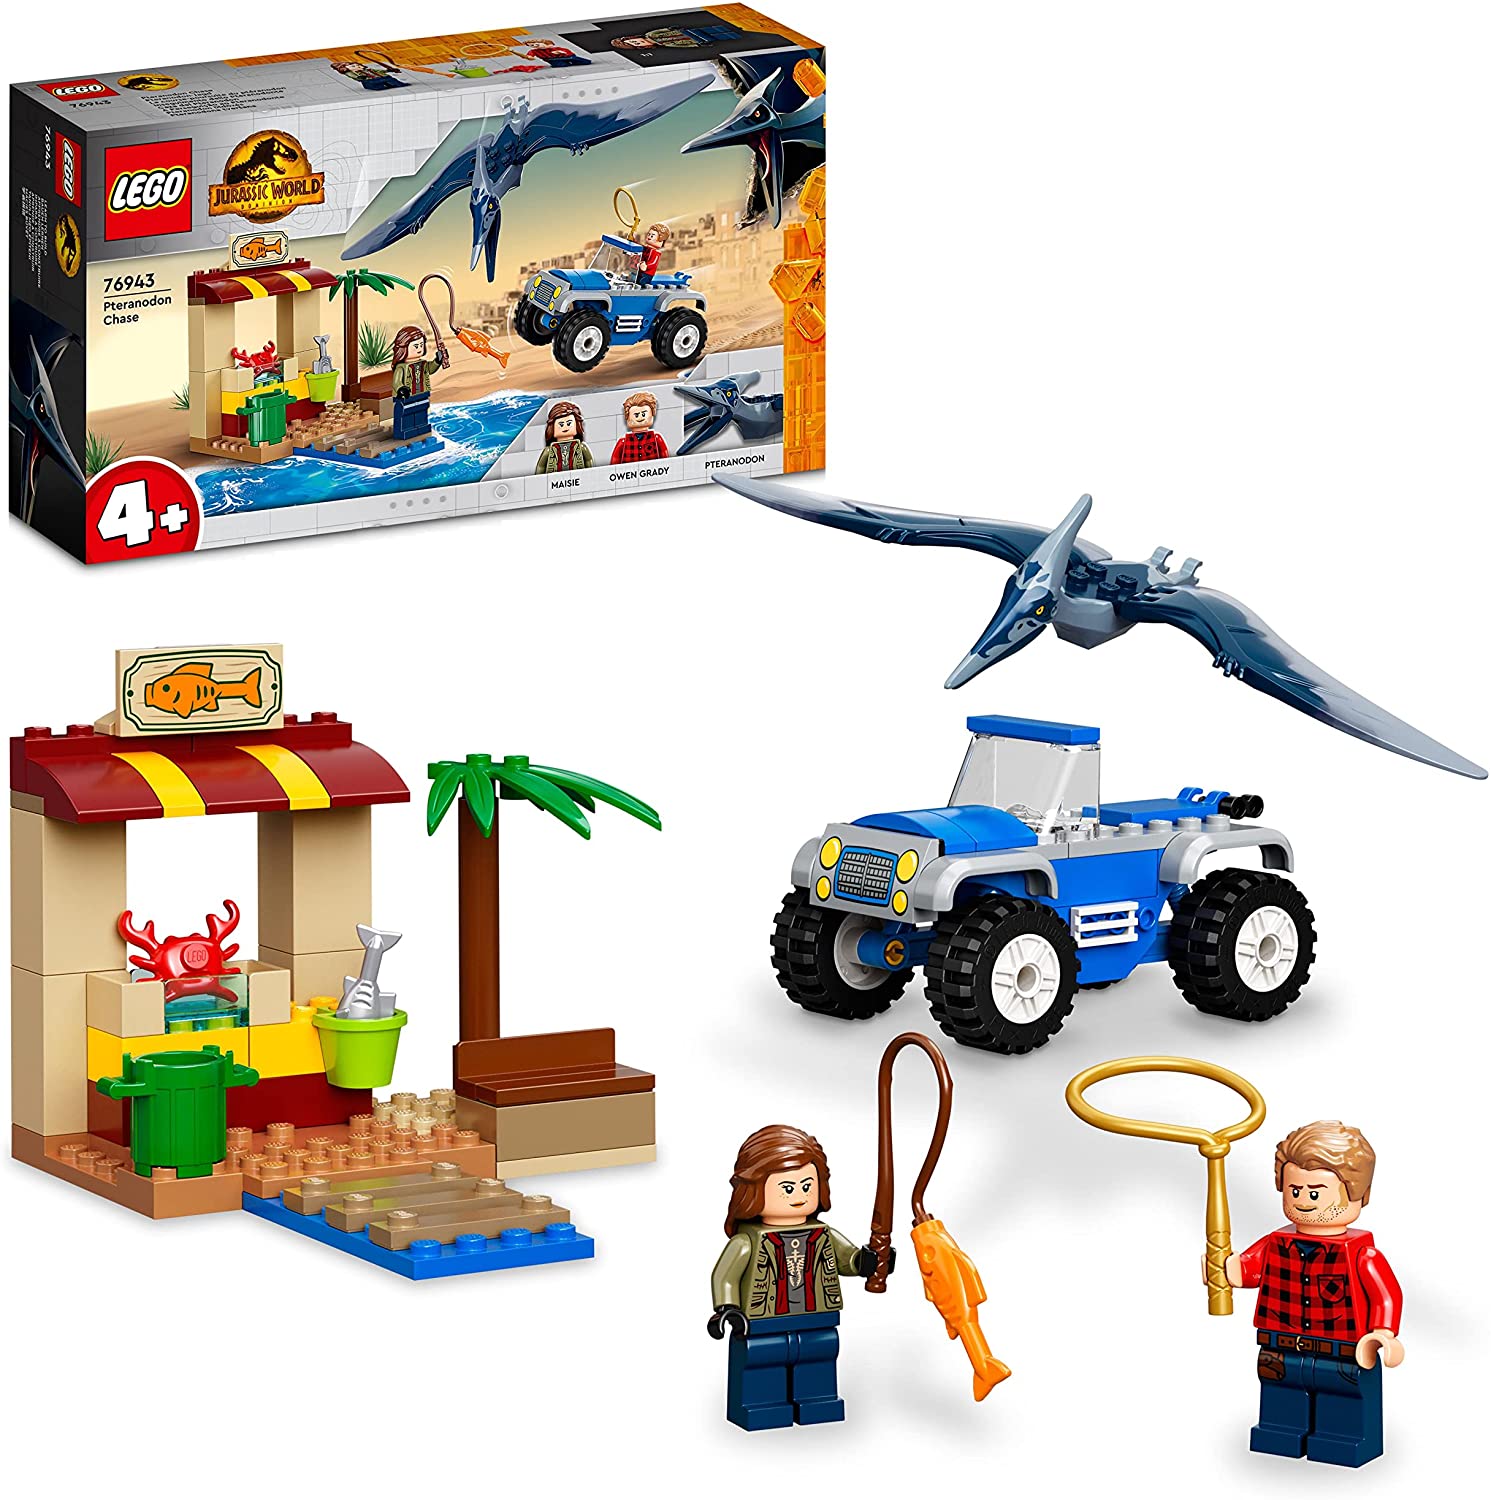 LEGO 76943 Jurassic World Pteranodon Hunting Set with Dino Figure and Toy Car for Children from 4 Years Dinosaur Toy